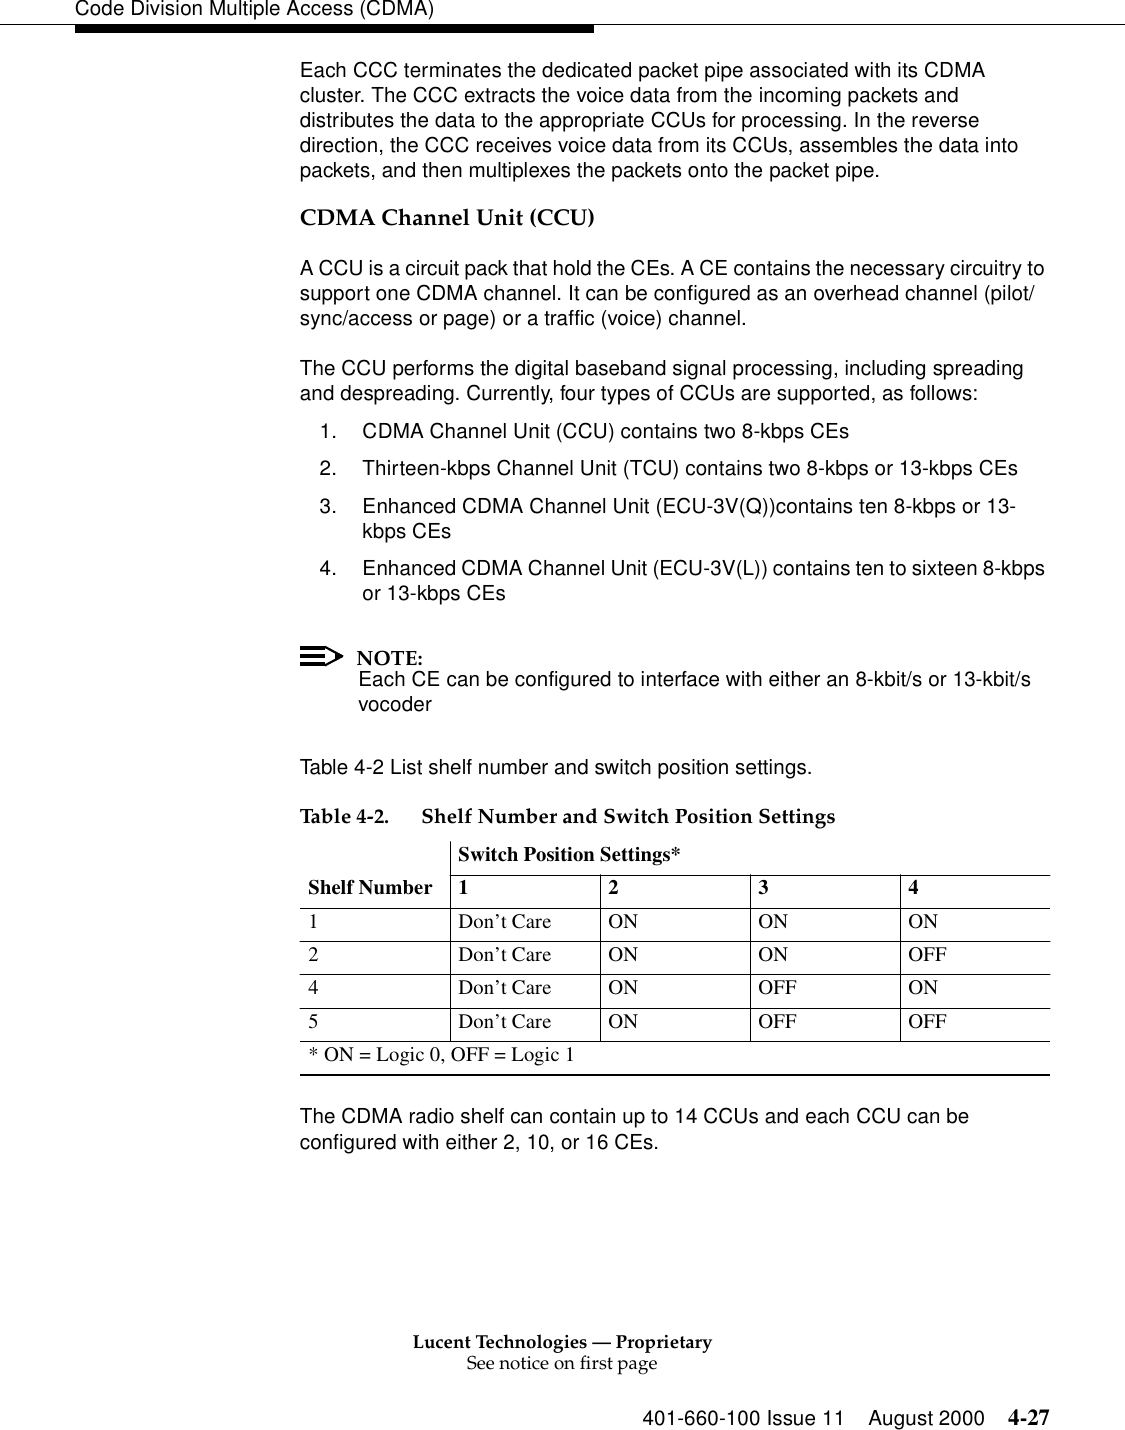 Lucent Technologies — ProprietarySee notice on first page401-660-100 Issue 11 August 2000 4-27Code Division Multiple Access (CDMA)Each CCC terminates the dedicated packet pipe associated with its CDMA cluster. The CCC extracts the voice data from the incoming packets and distributes the data to the appropriate CCUs for processing. In the reverse direction, the CCC receives voice data from its CCUs, assembles the data into packets, and then multiplexes the packets onto the packet pipe.CDMA Channel Unit (CCU)A CCU is a circuit pack that hold the CEs. A CE contains the necessary circuitry to support one CDMA channel. It can be configured as an overhead channel (pilot/sync/access or page) or a traffic (voice) channel.The CCU performs the digital baseband signal processing, including spreading and despreading. Currently, four types of CCUs are supported, as follows:1. CDMA Channel Unit (CCU) contains two 8-kbps CEs2. Thirteen-kbps Channel Unit (TCU) contains two 8-kbps or 13-kbps CEs3. Enhanced CDMA Channel Unit (ECU-3V(Q))contains ten 8-kbps or 13-kbps CEs4. Enhanced CDMA Channel Unit (ECU-3V(L)) contains ten to sixteen 8-kbps or 13-kbps CEsNOTE:Each CE can be configured to interface with either an 8-kbit/s or 13-kbit/s vocoderTable 4-2 List shelf number and switch position settings.The CDMA radio shelf can contain up to 14 CCUs and each CCU can be configured with either 2, 10, or 16 CEs. Table 4-2. Shelf Number and Switch Position SettingsShelf NumberSwitch Position Settings*12341 Don’t Care ON ON ON2 Don’t Care ON ON OFF4 Don’t Care ON OFF ON5 Don’t Care ON OFF OFF* ON = Logic 0, OFF = Logic 1